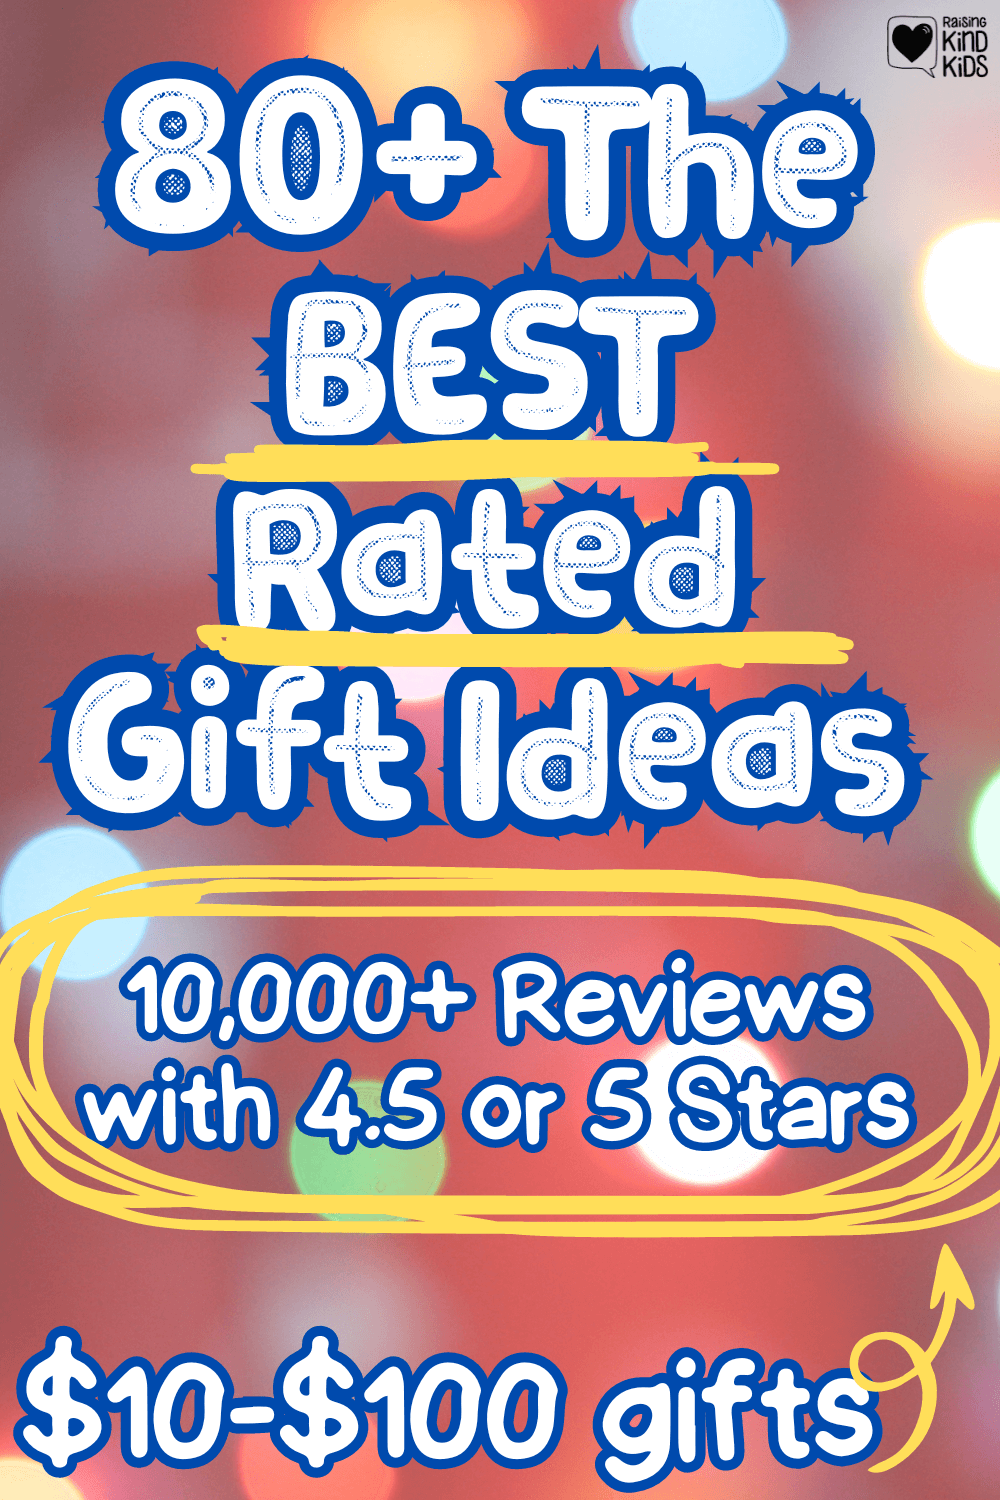 This list of best rated gifts on Amazon all have two things in common: they all have over 10,000 reviews AND 4.5 stars or higher.